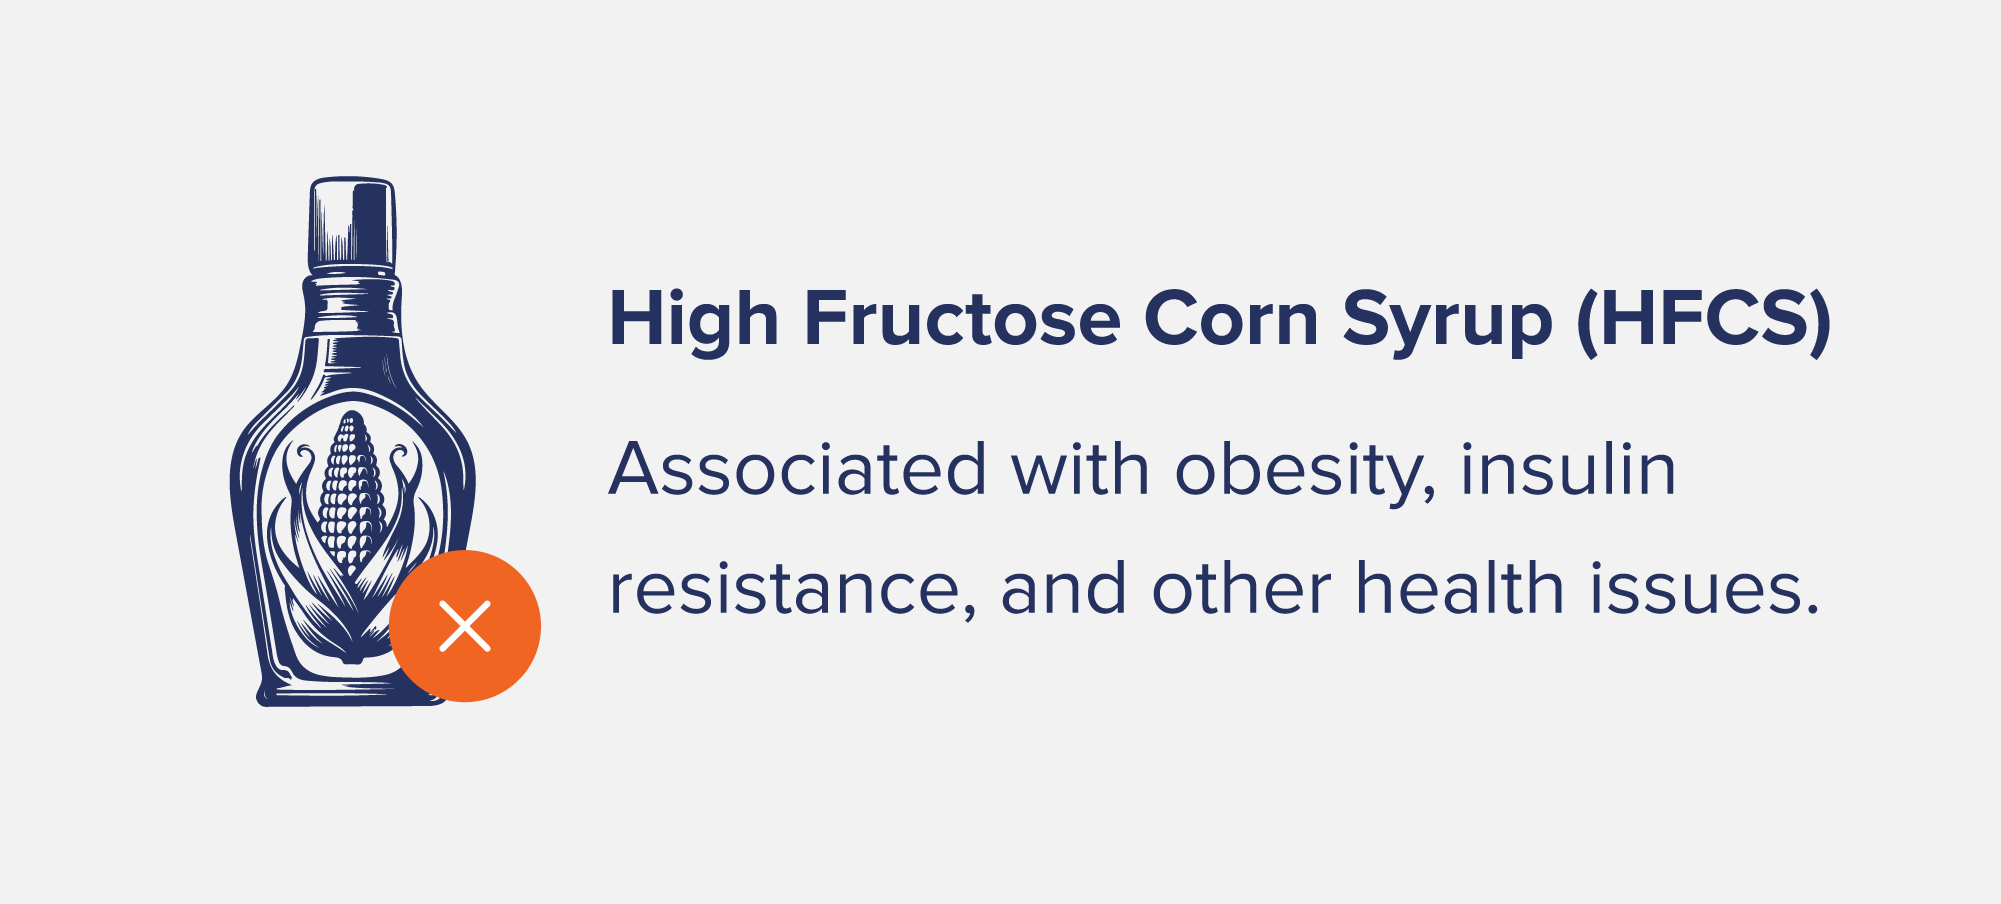 High Fructose Corn Syrup (HFCS)